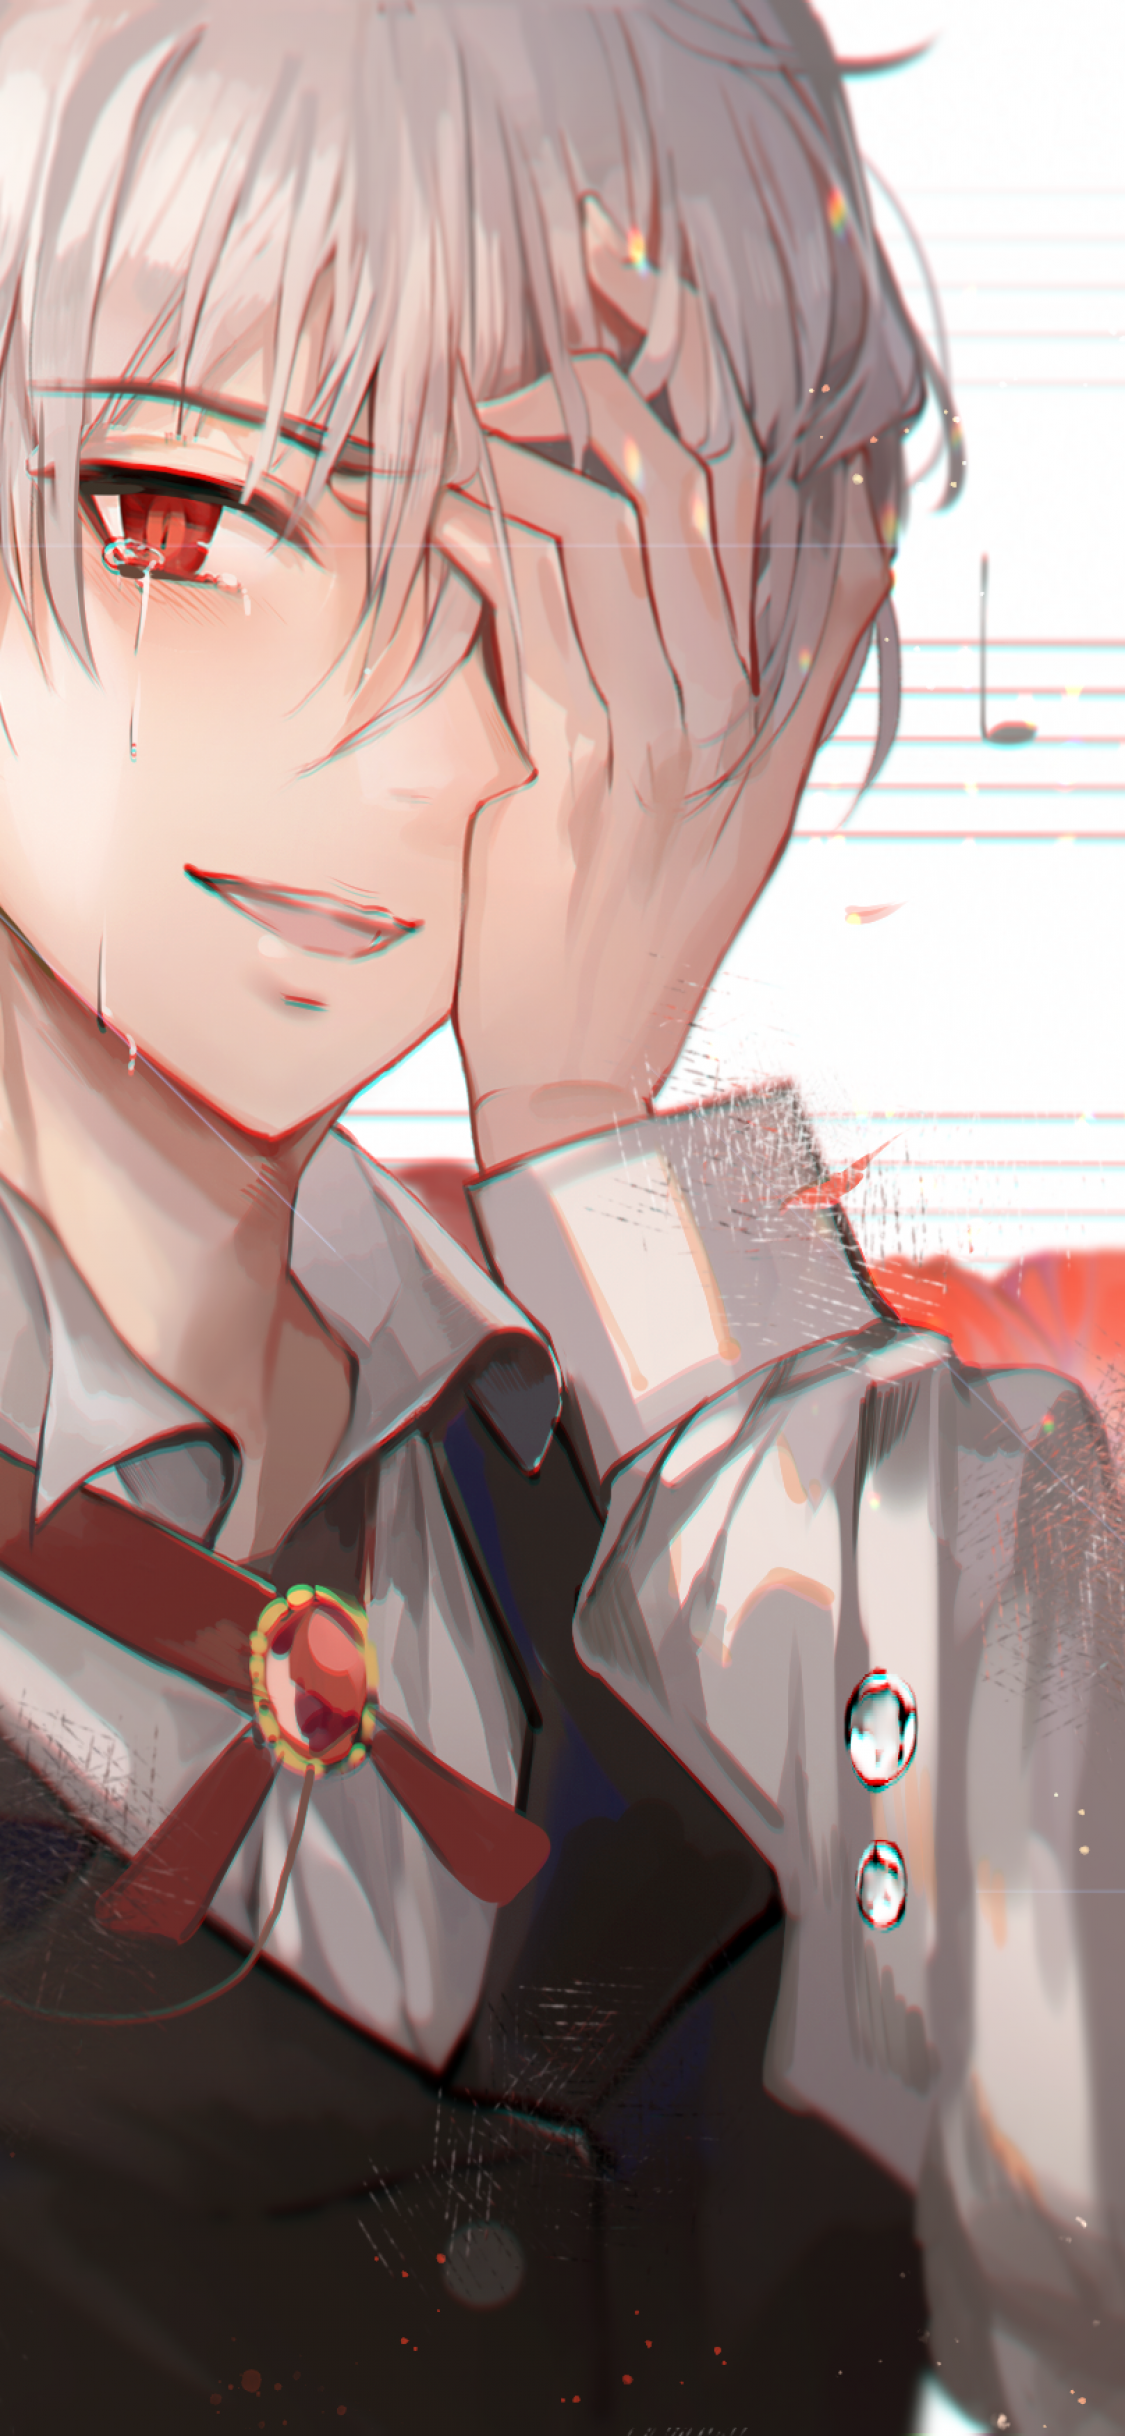 Download 1125x2436 Anime Boy, Crying, Red Eye, Tears, White Hair Wallpaper for iPhone X